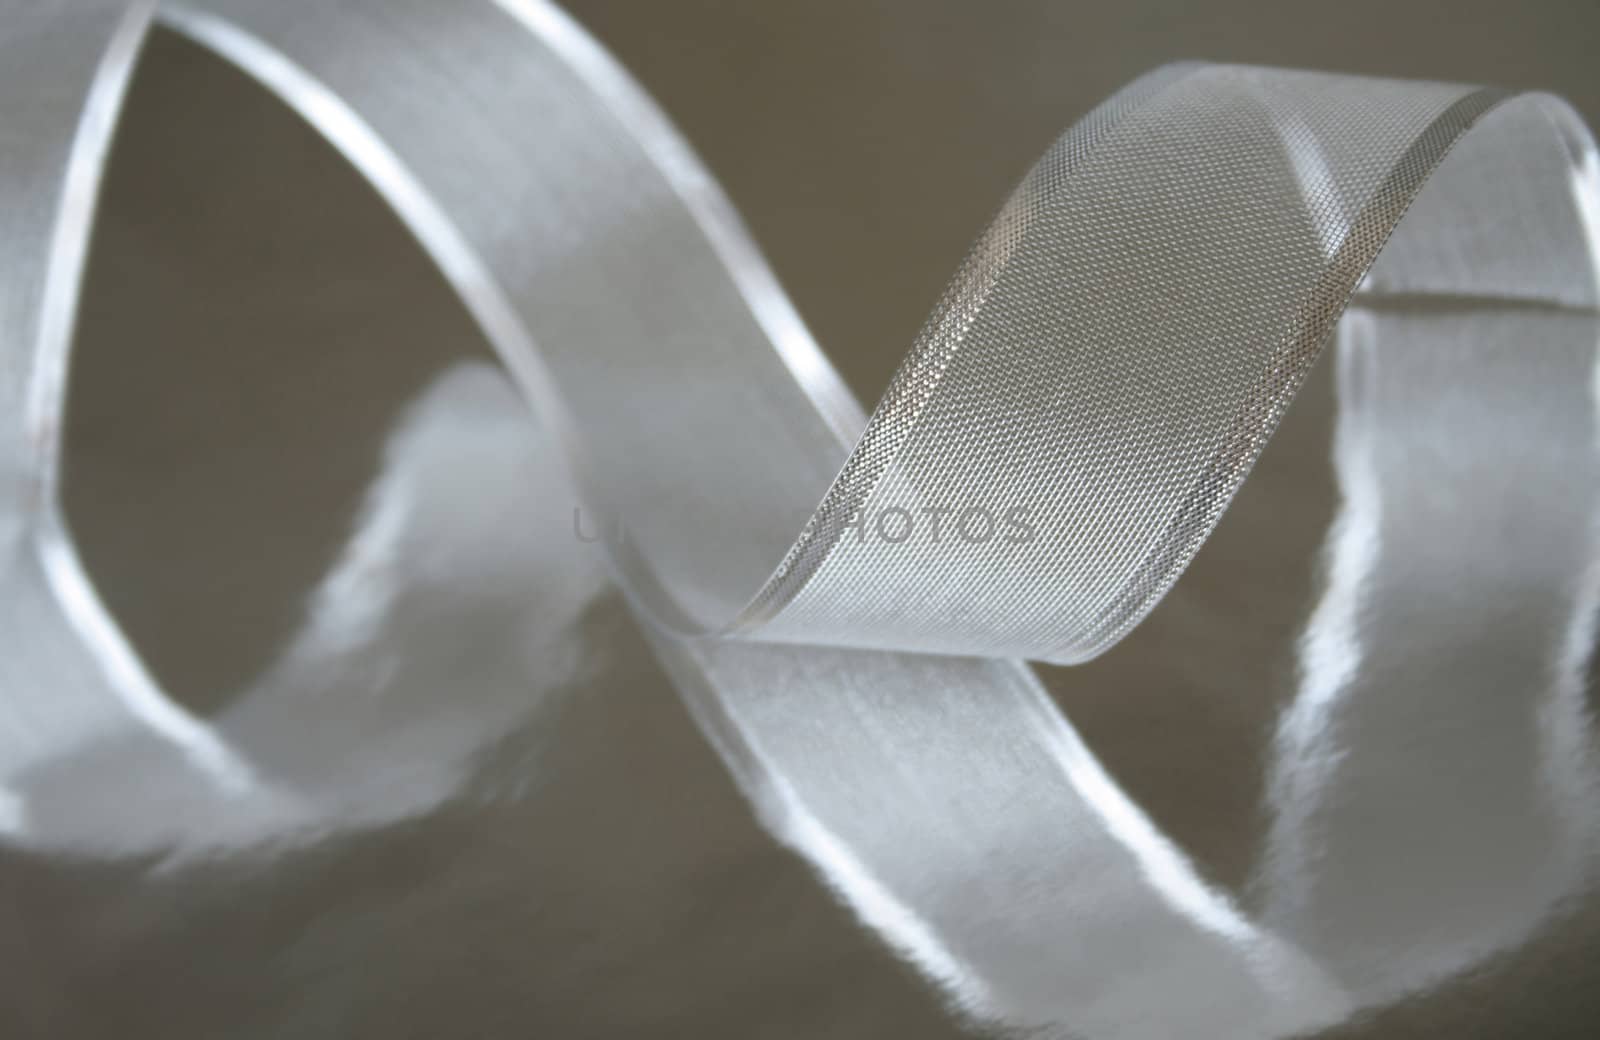 A piece of silver ribbon curled up on a metallic silver background. Shallow depth of field and selective focus.